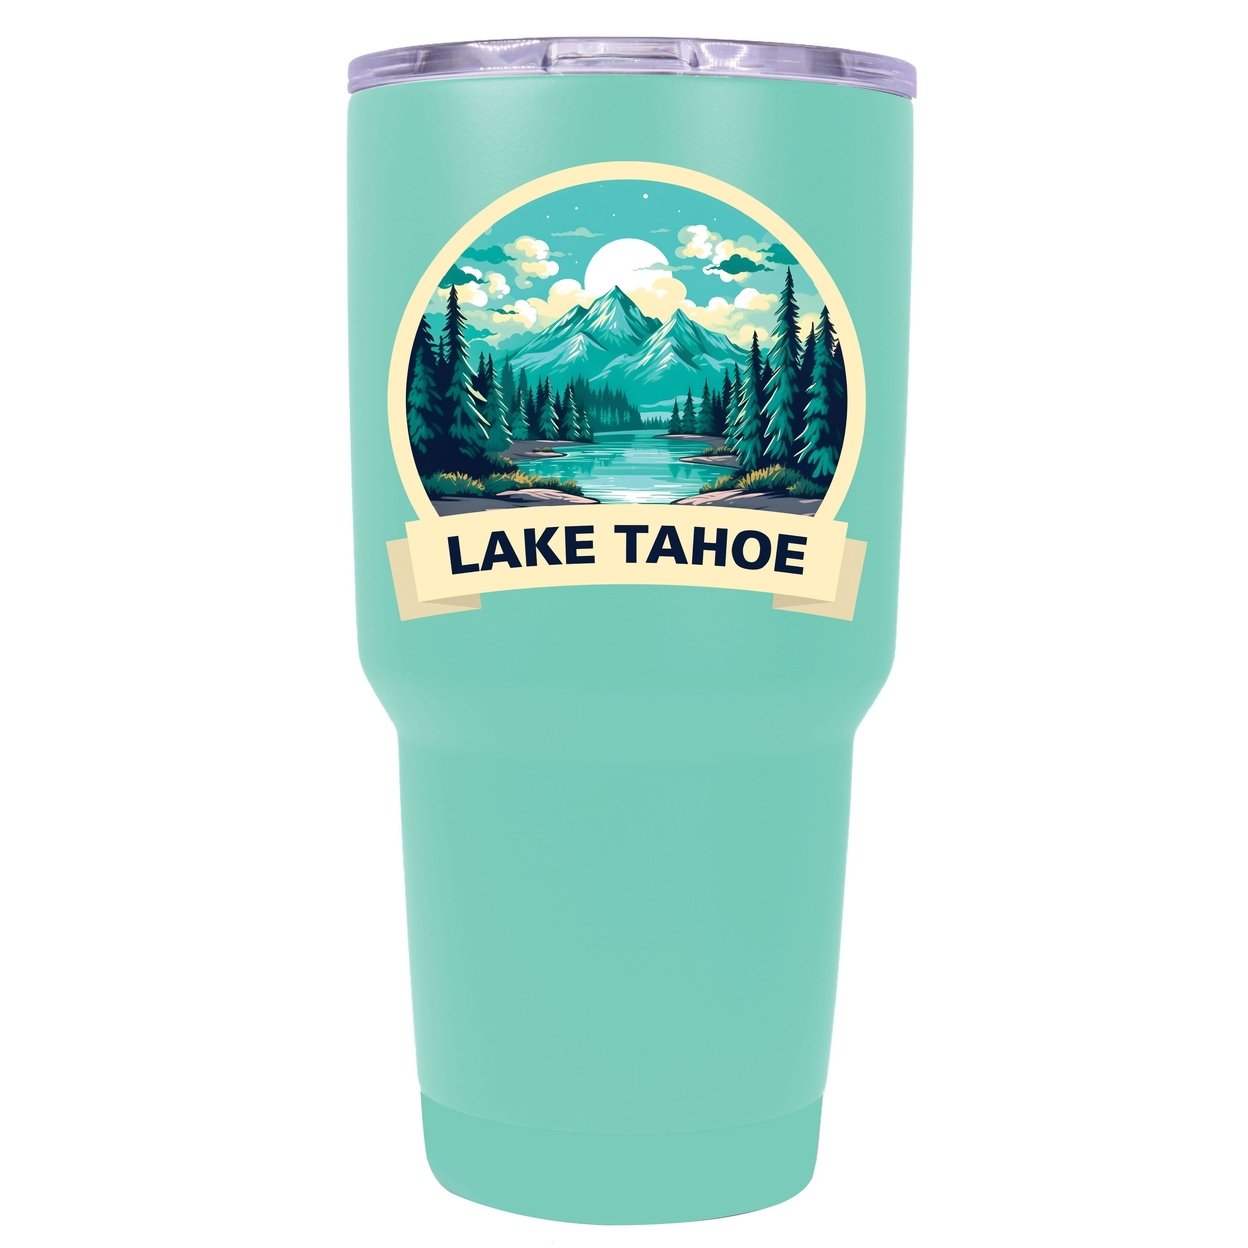 Lake Tahoe California Souvenir 24 Oz Insulated Stainless Steel Tumbler - Red,,4-Pack